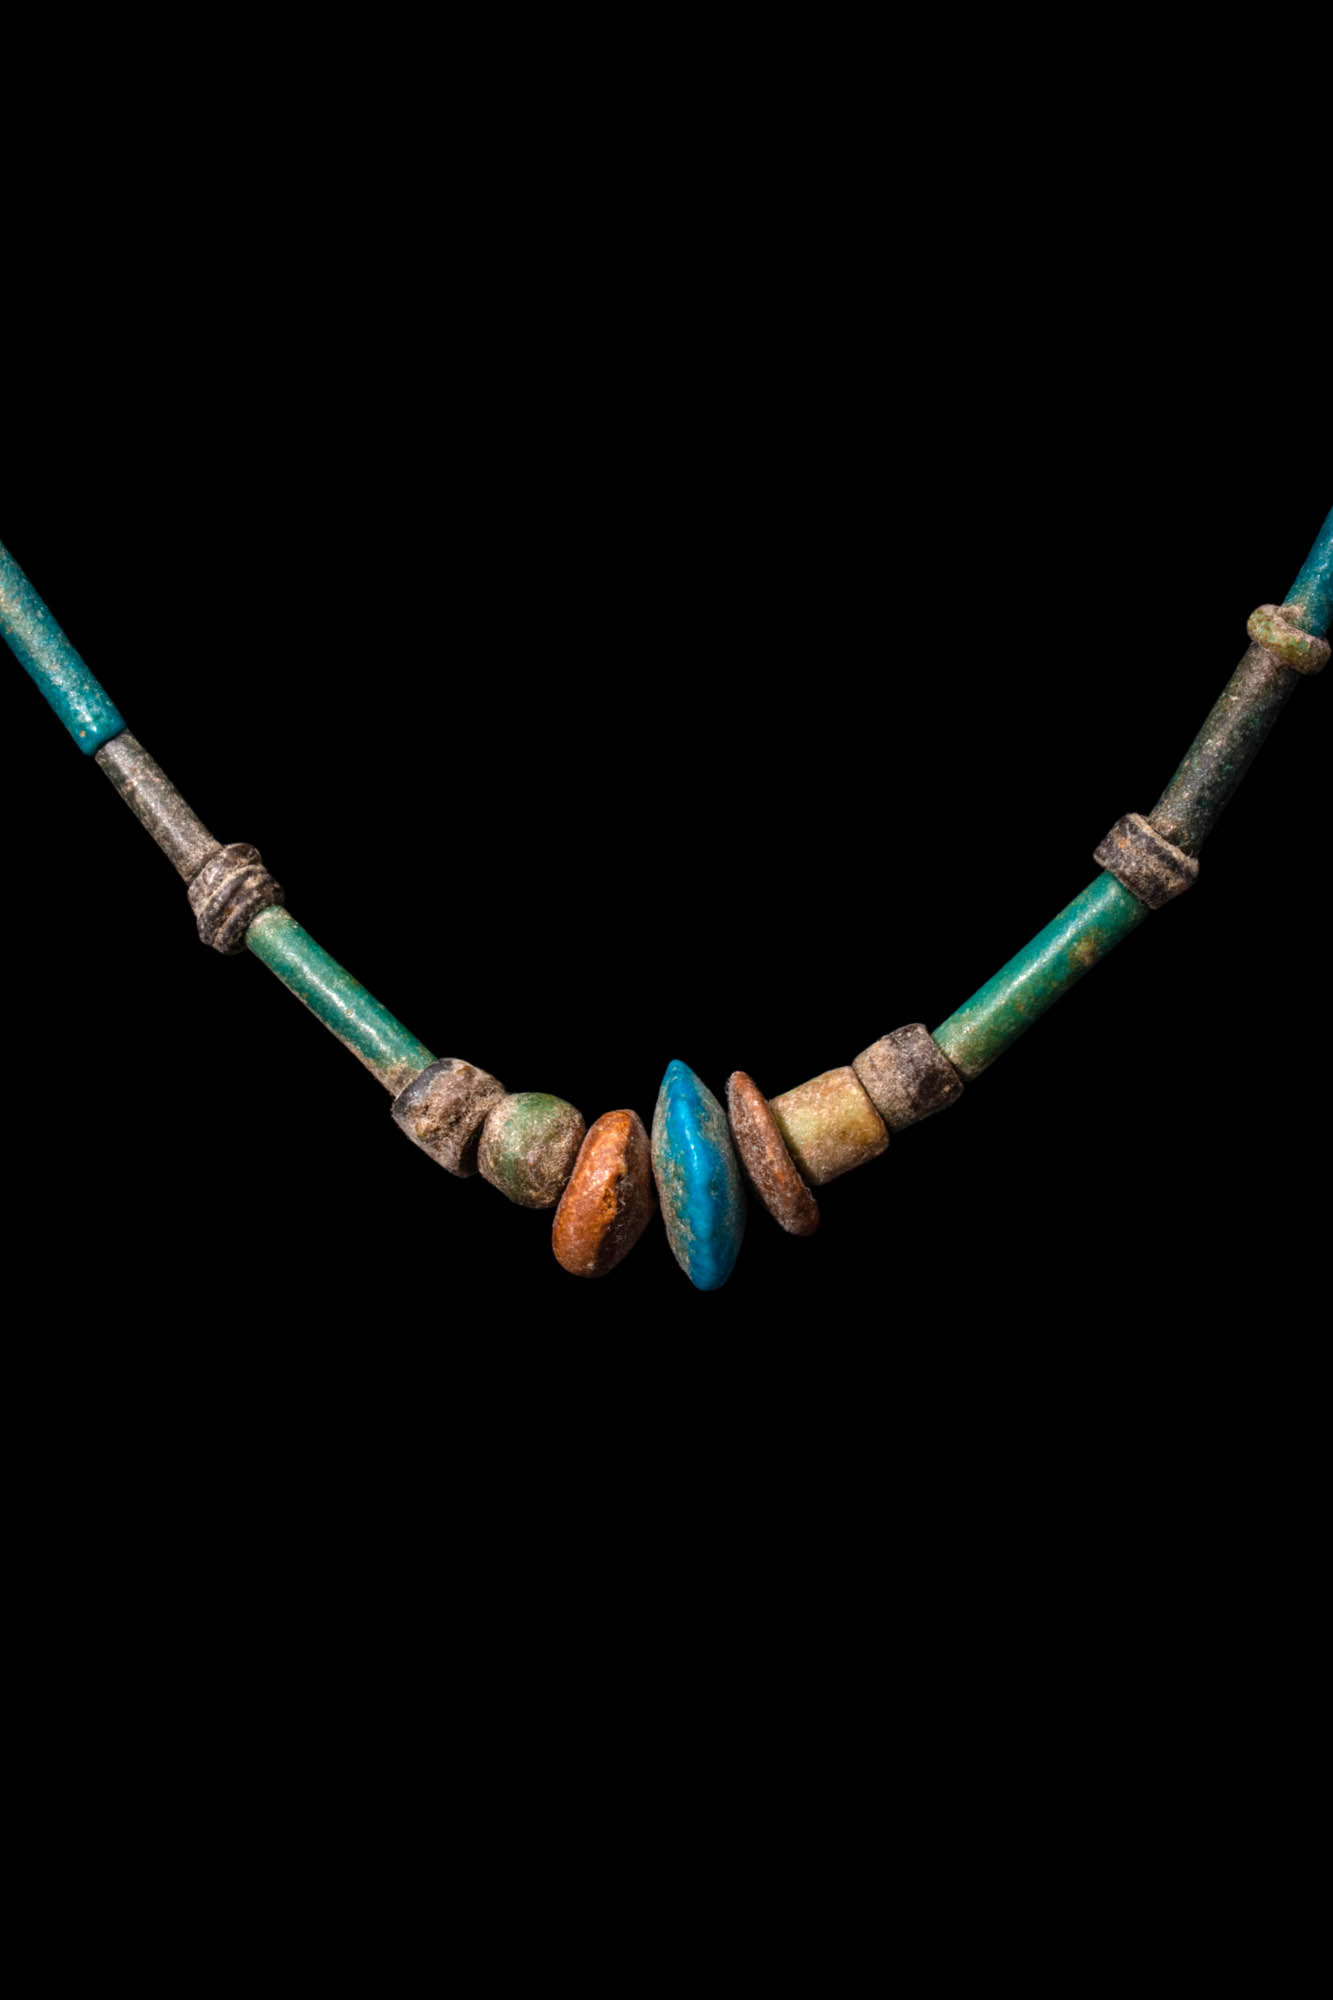 NEW KINGDOM EGYPTIAN FAIENCE NECKLACE - Image 4 of 5